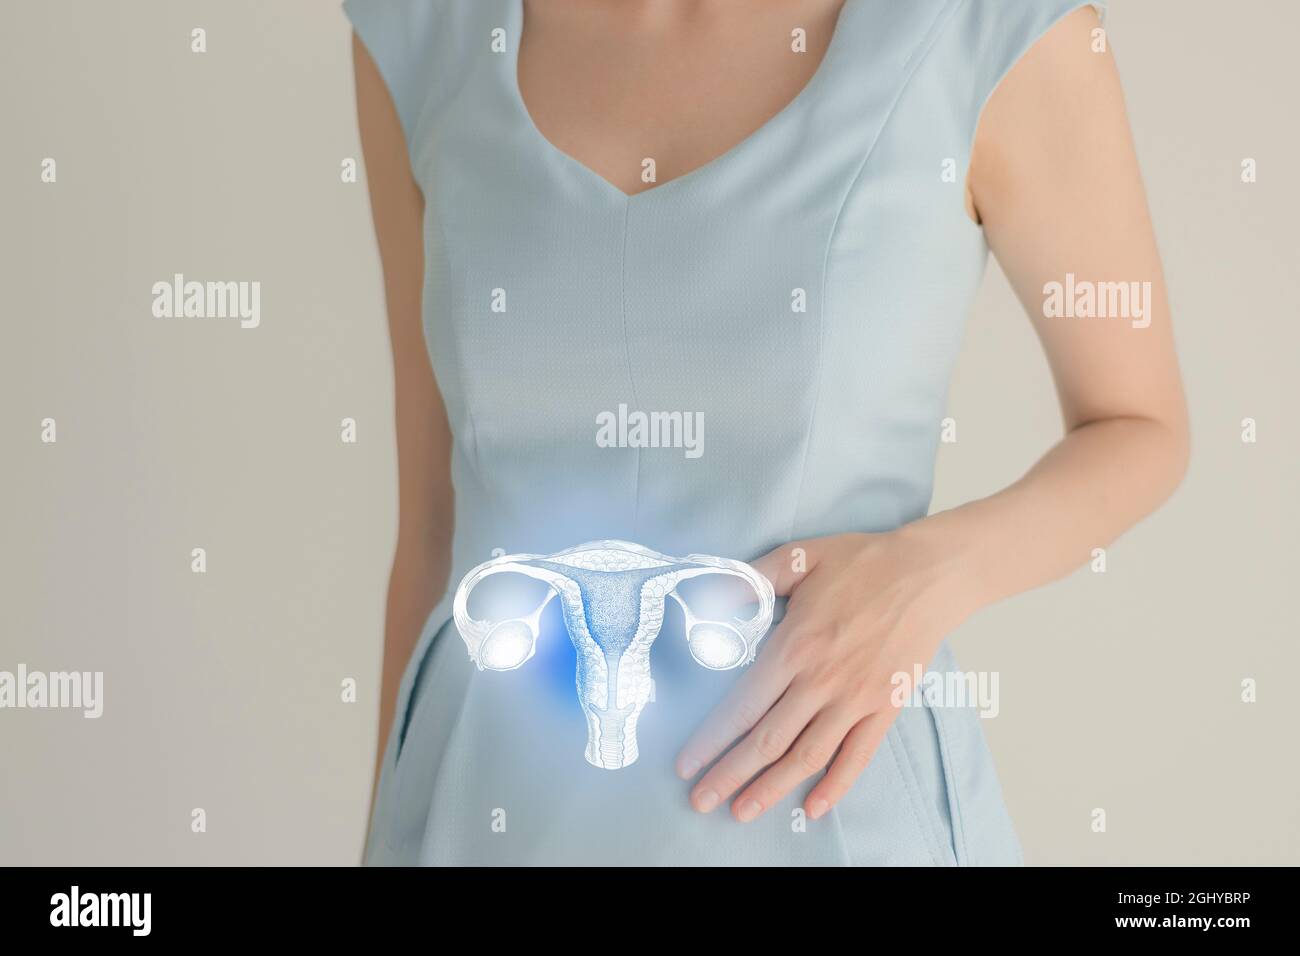 Unrecognizable female patient in blue clothes, highlighted handrawn uterus in hands. Human reproductive system issues concept. Stock Photo